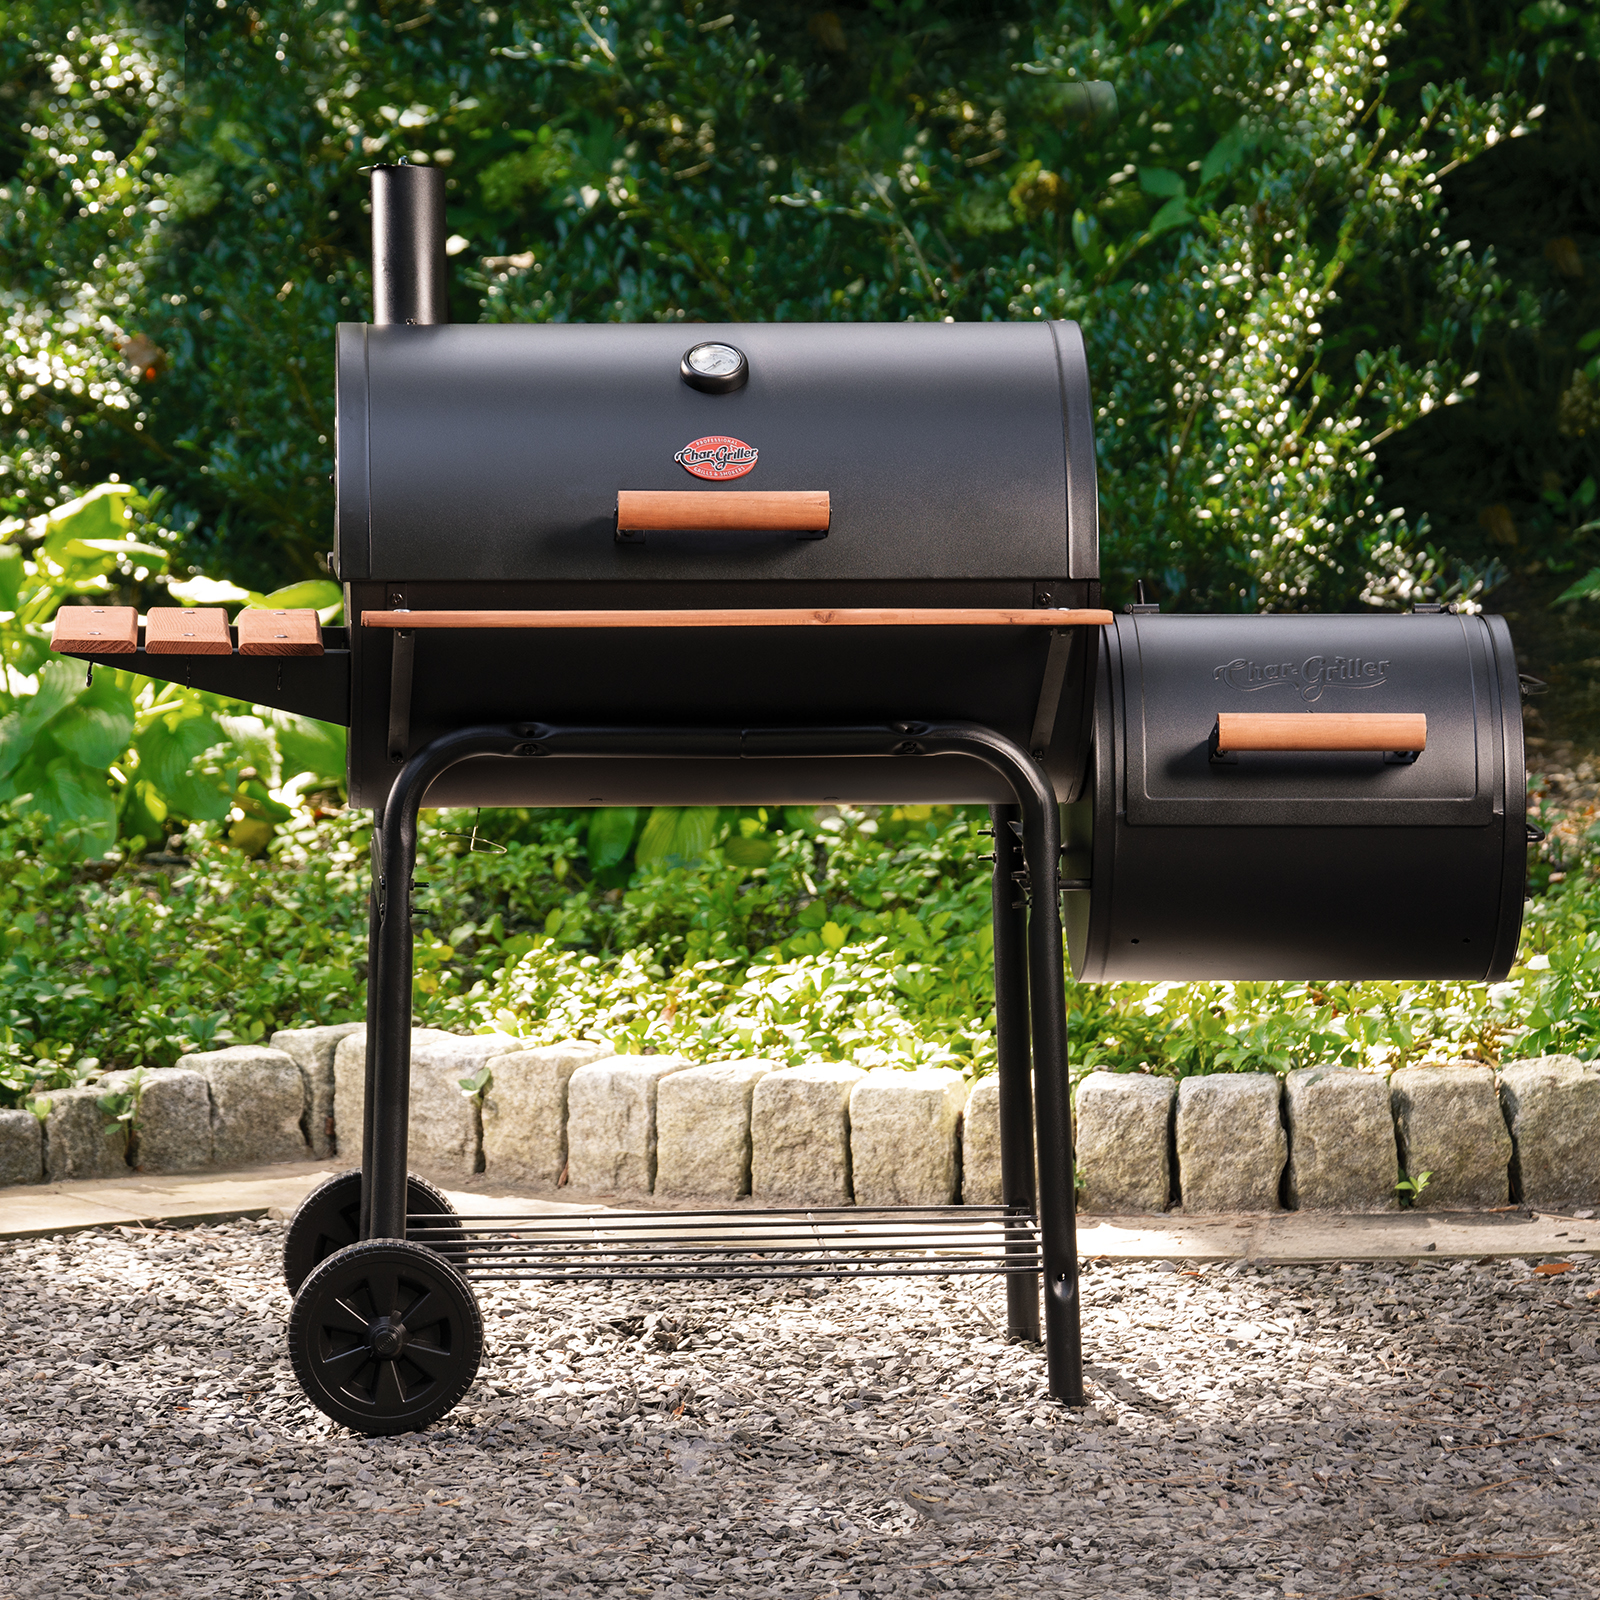 Char-Griller Smokin Pro 28" Charcoal Grill with Heat Diffuser - image 4 of 13